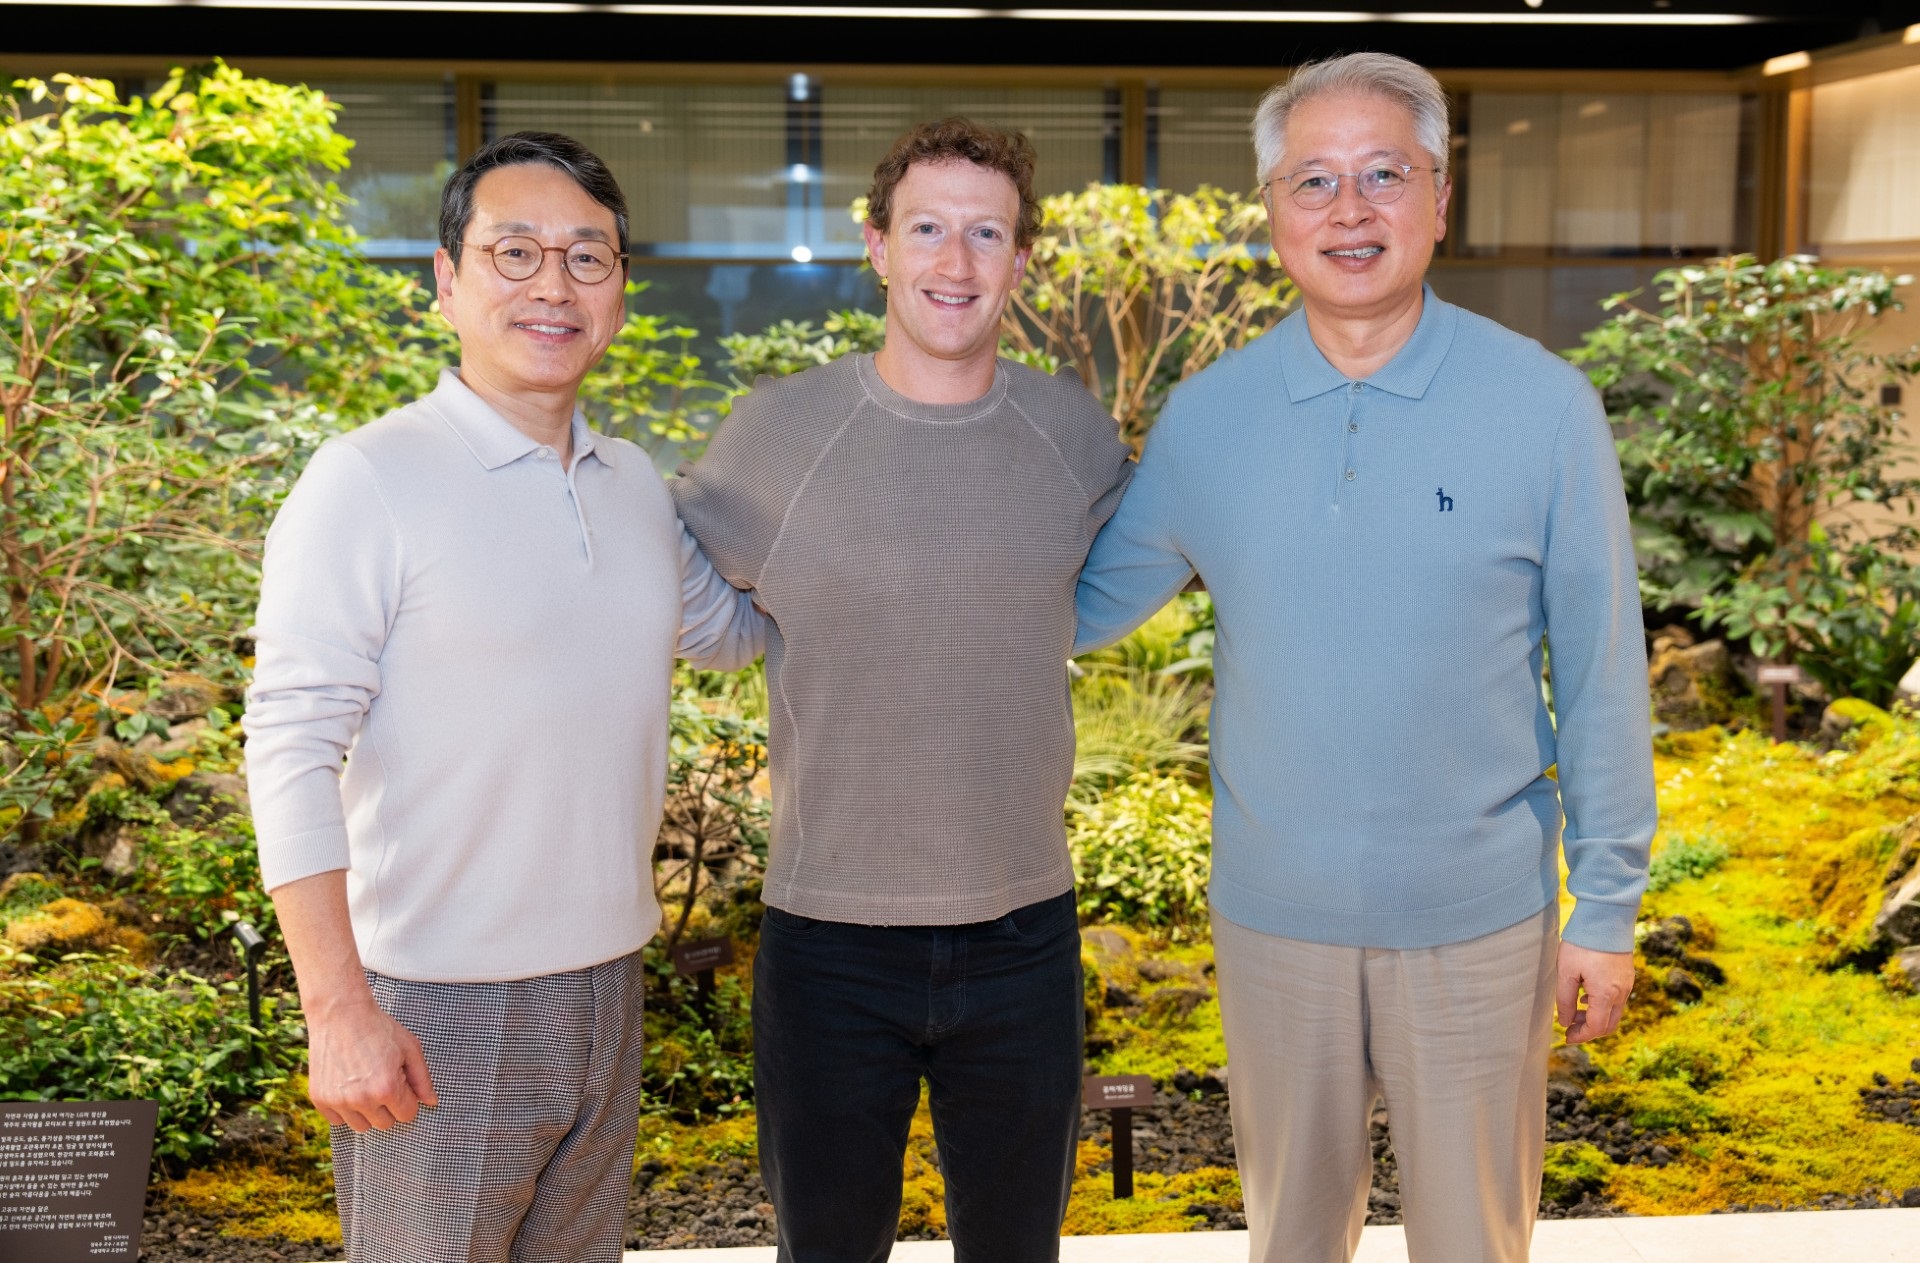 A photo of LG's CEO, Meta CEO and president of the Home Entertainment company standing next to each other